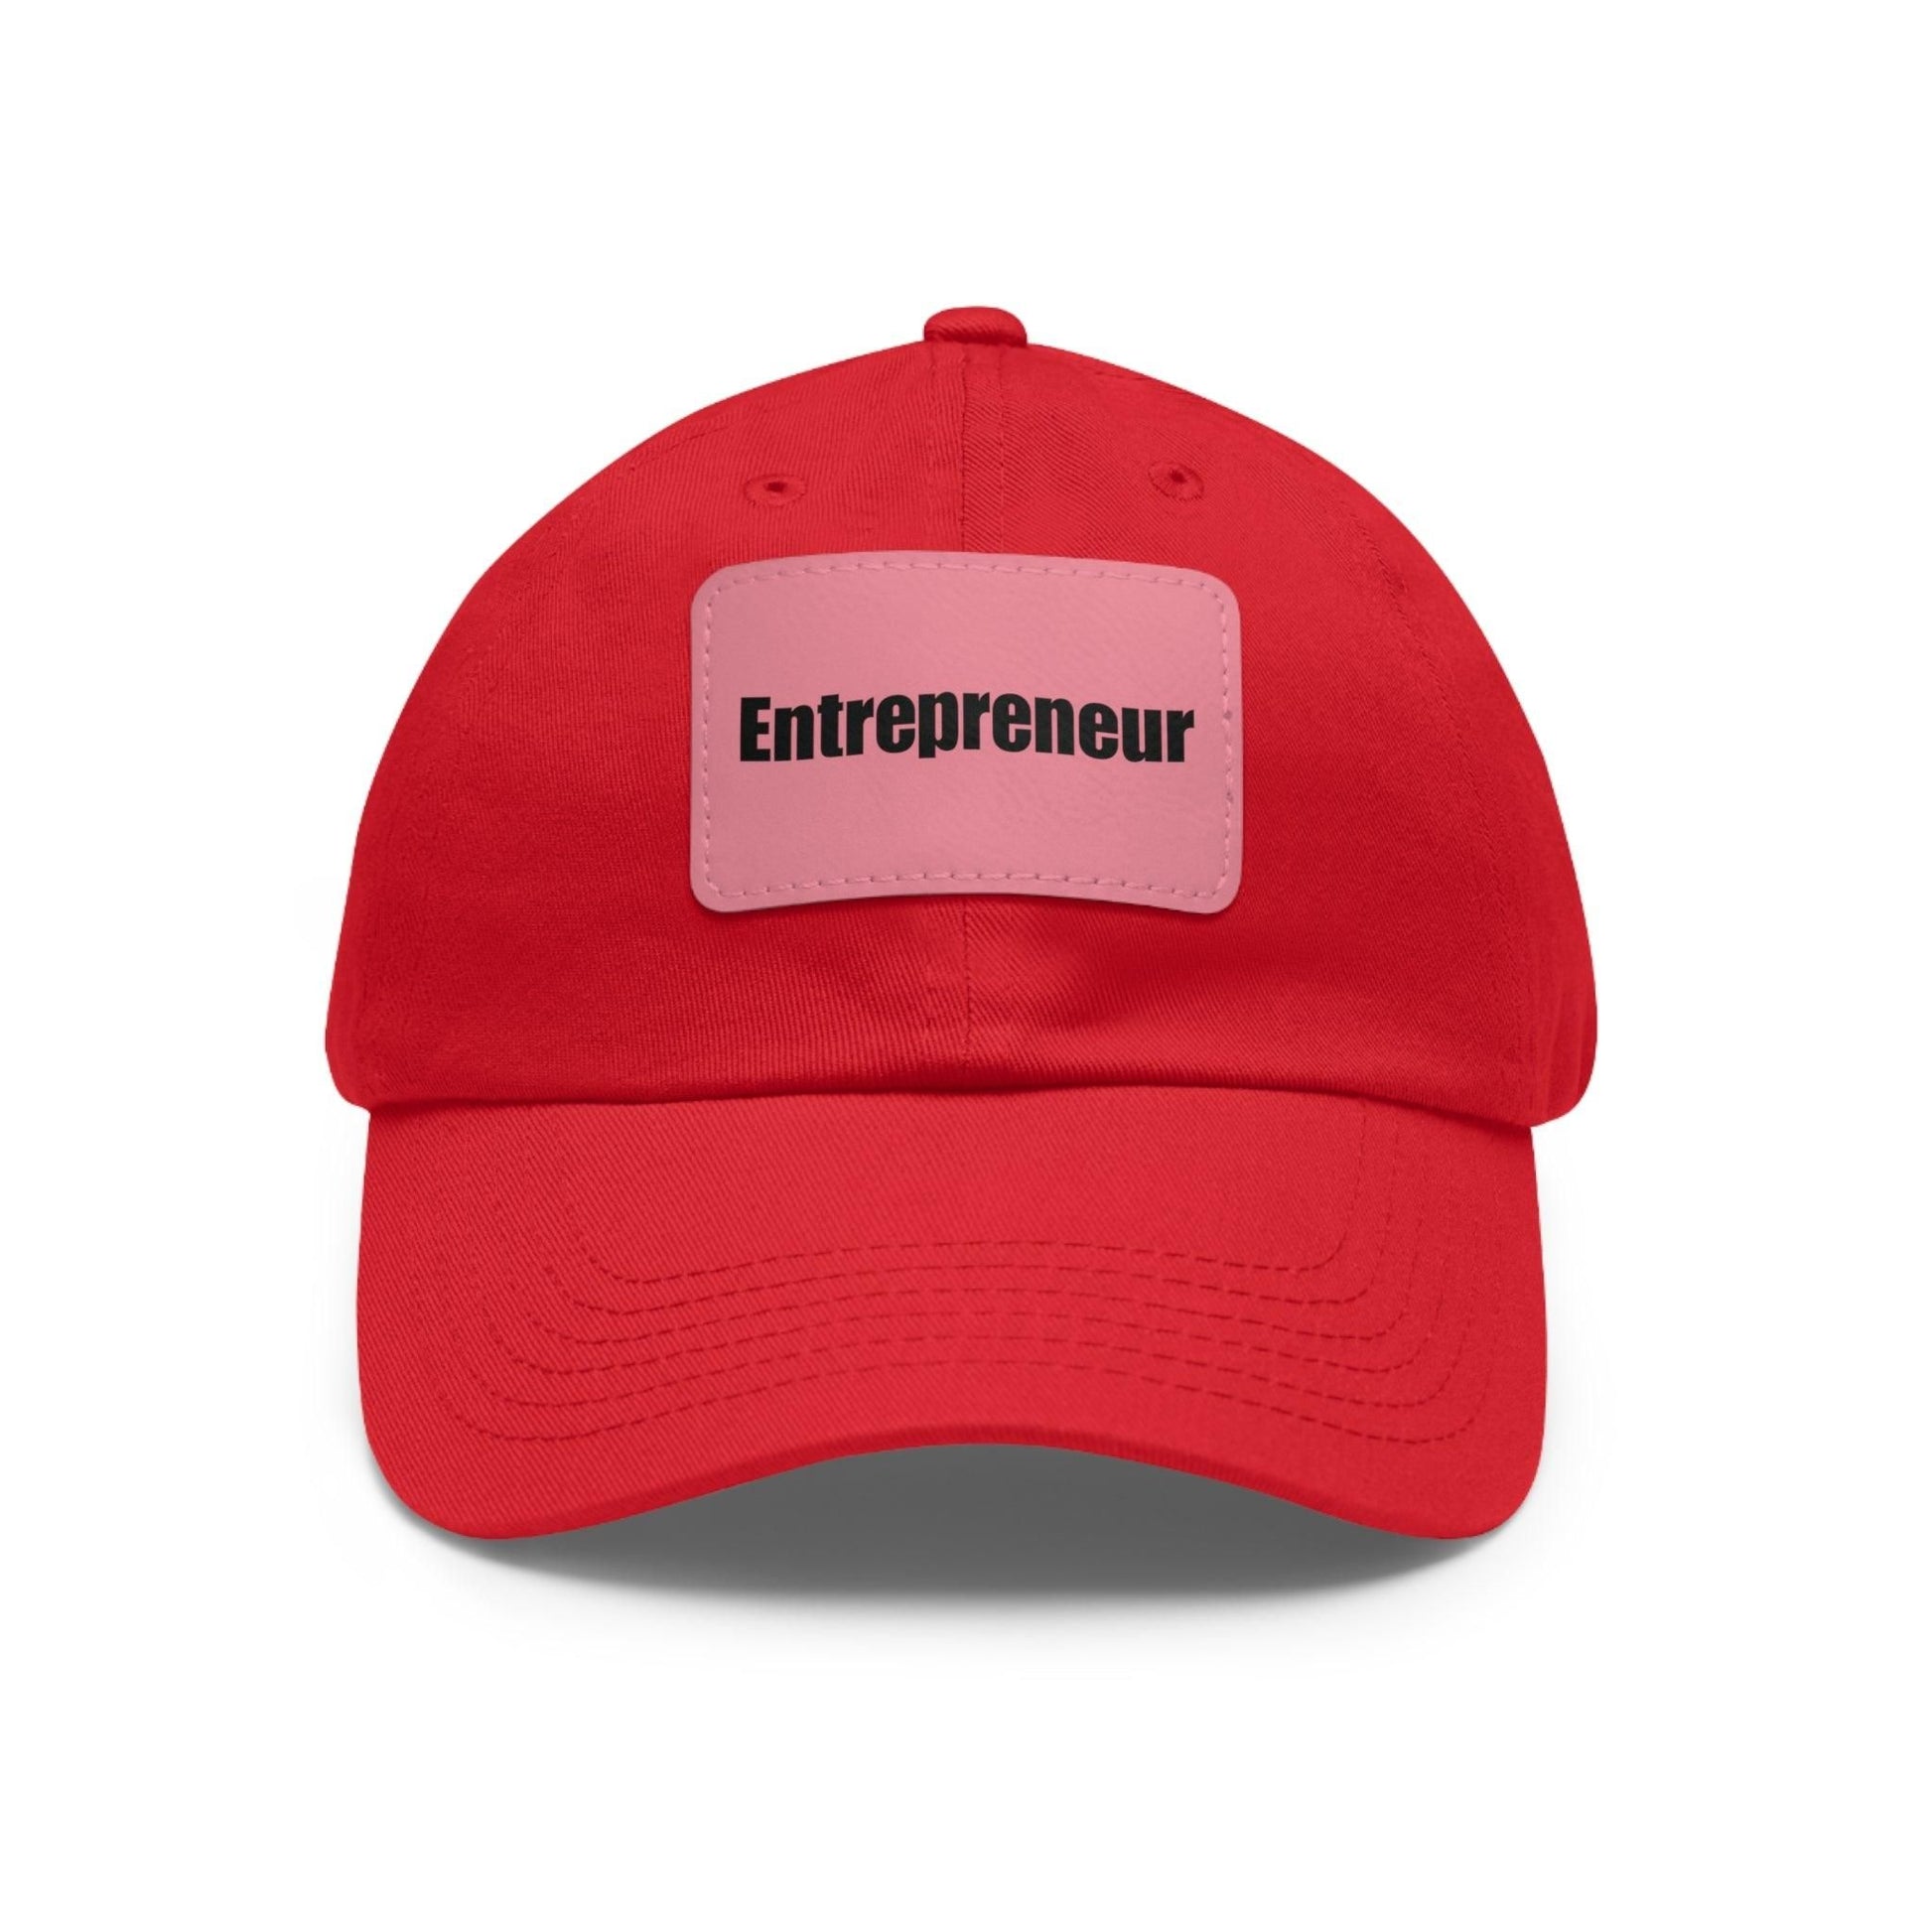 Entrepreneur Baseball Hat with Leather Patch Cap Red / Pink patch Rectangle One size